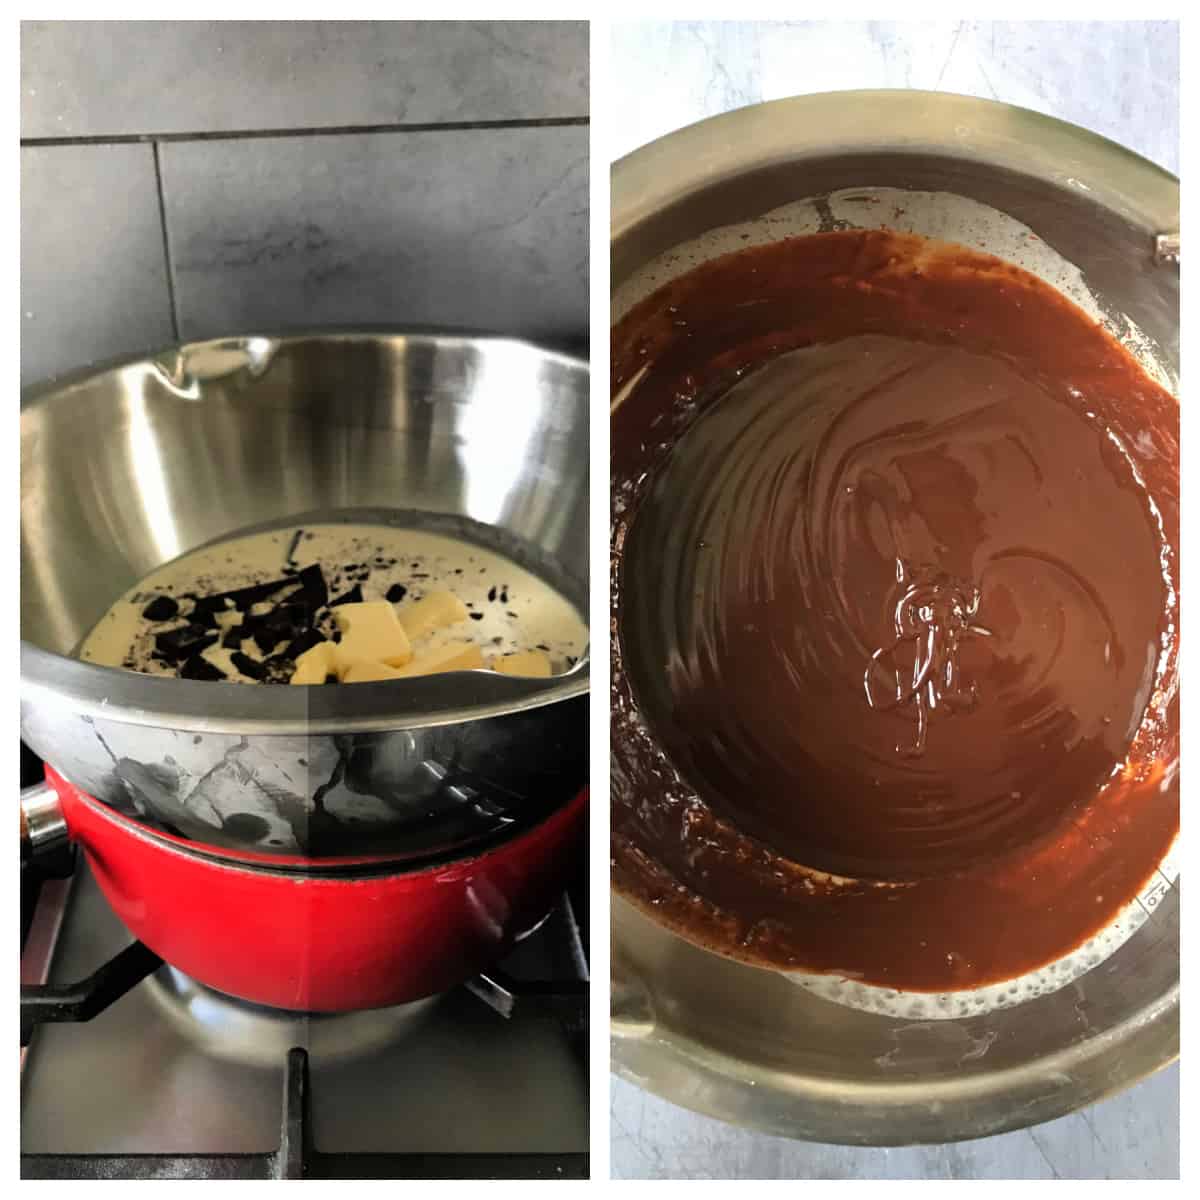 Melting cream, butter and chocolate, and stirring it into sauce.